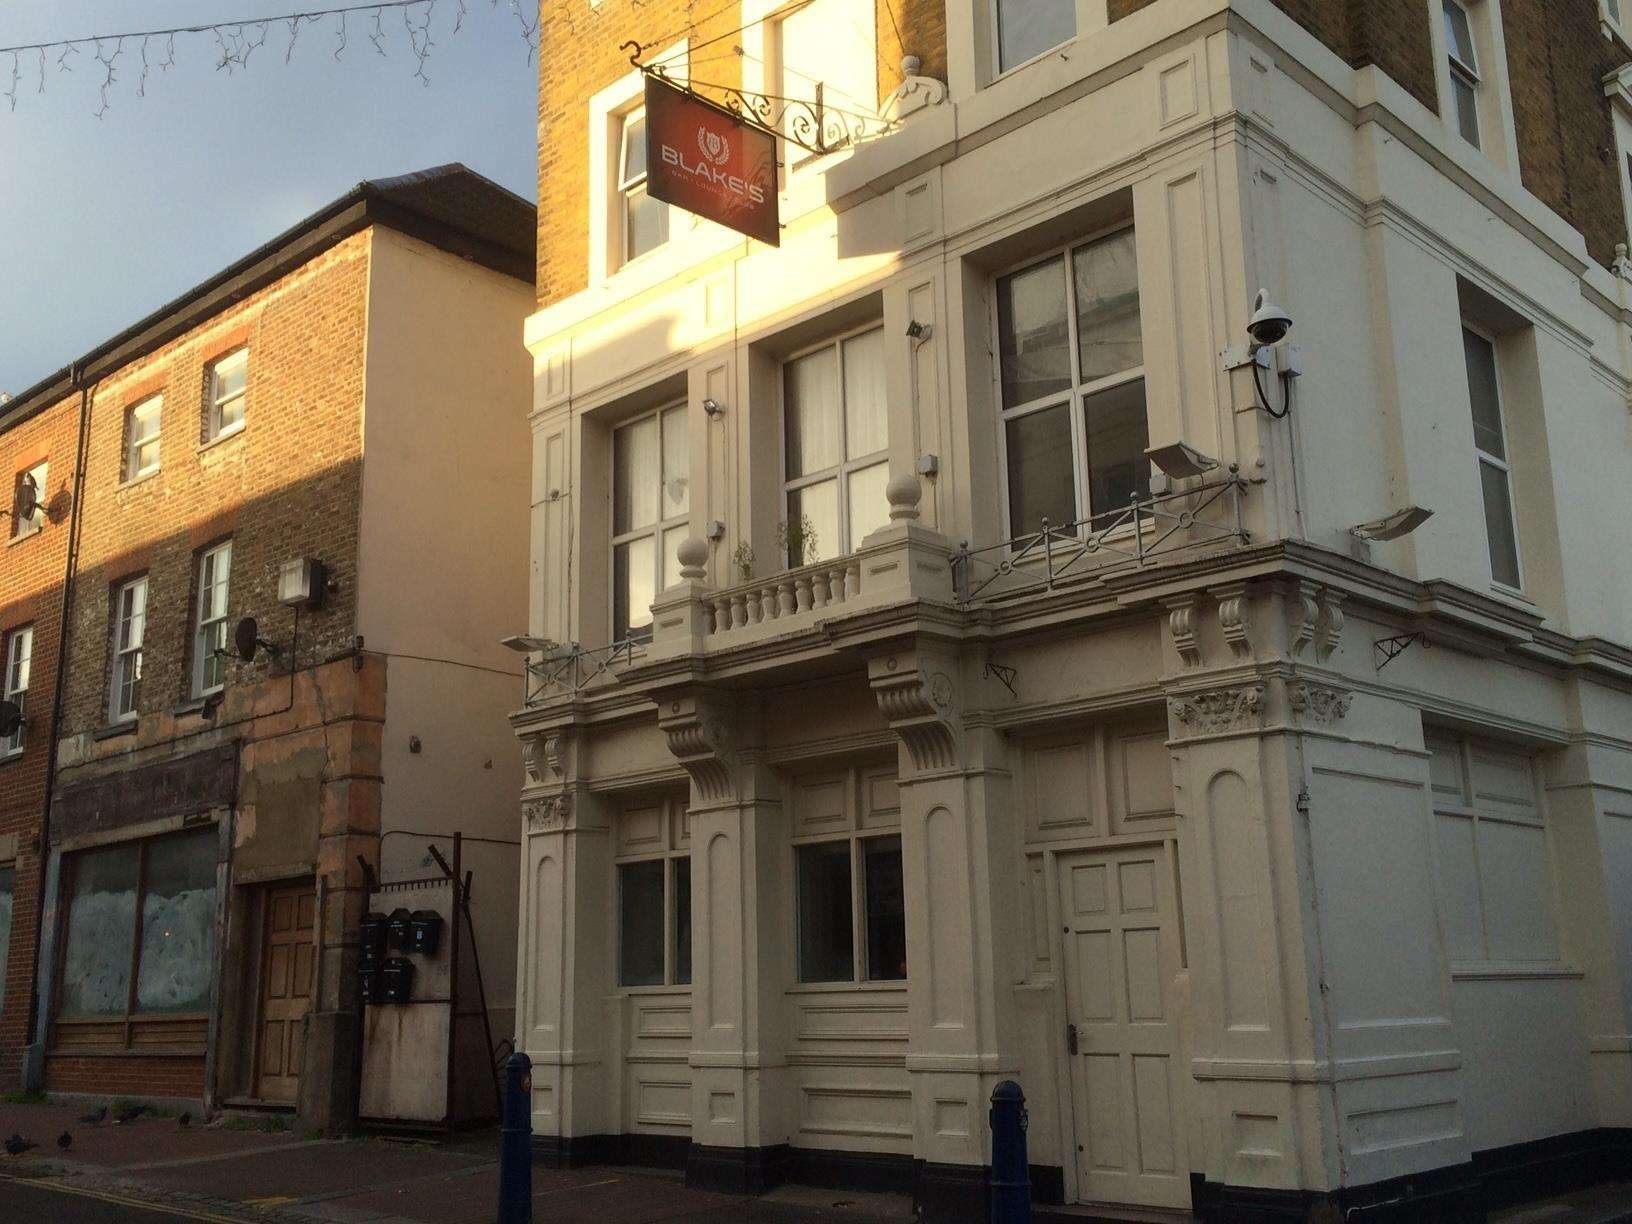 The man was attacked outside Blake's nightclub in Queen Street, Gravesend